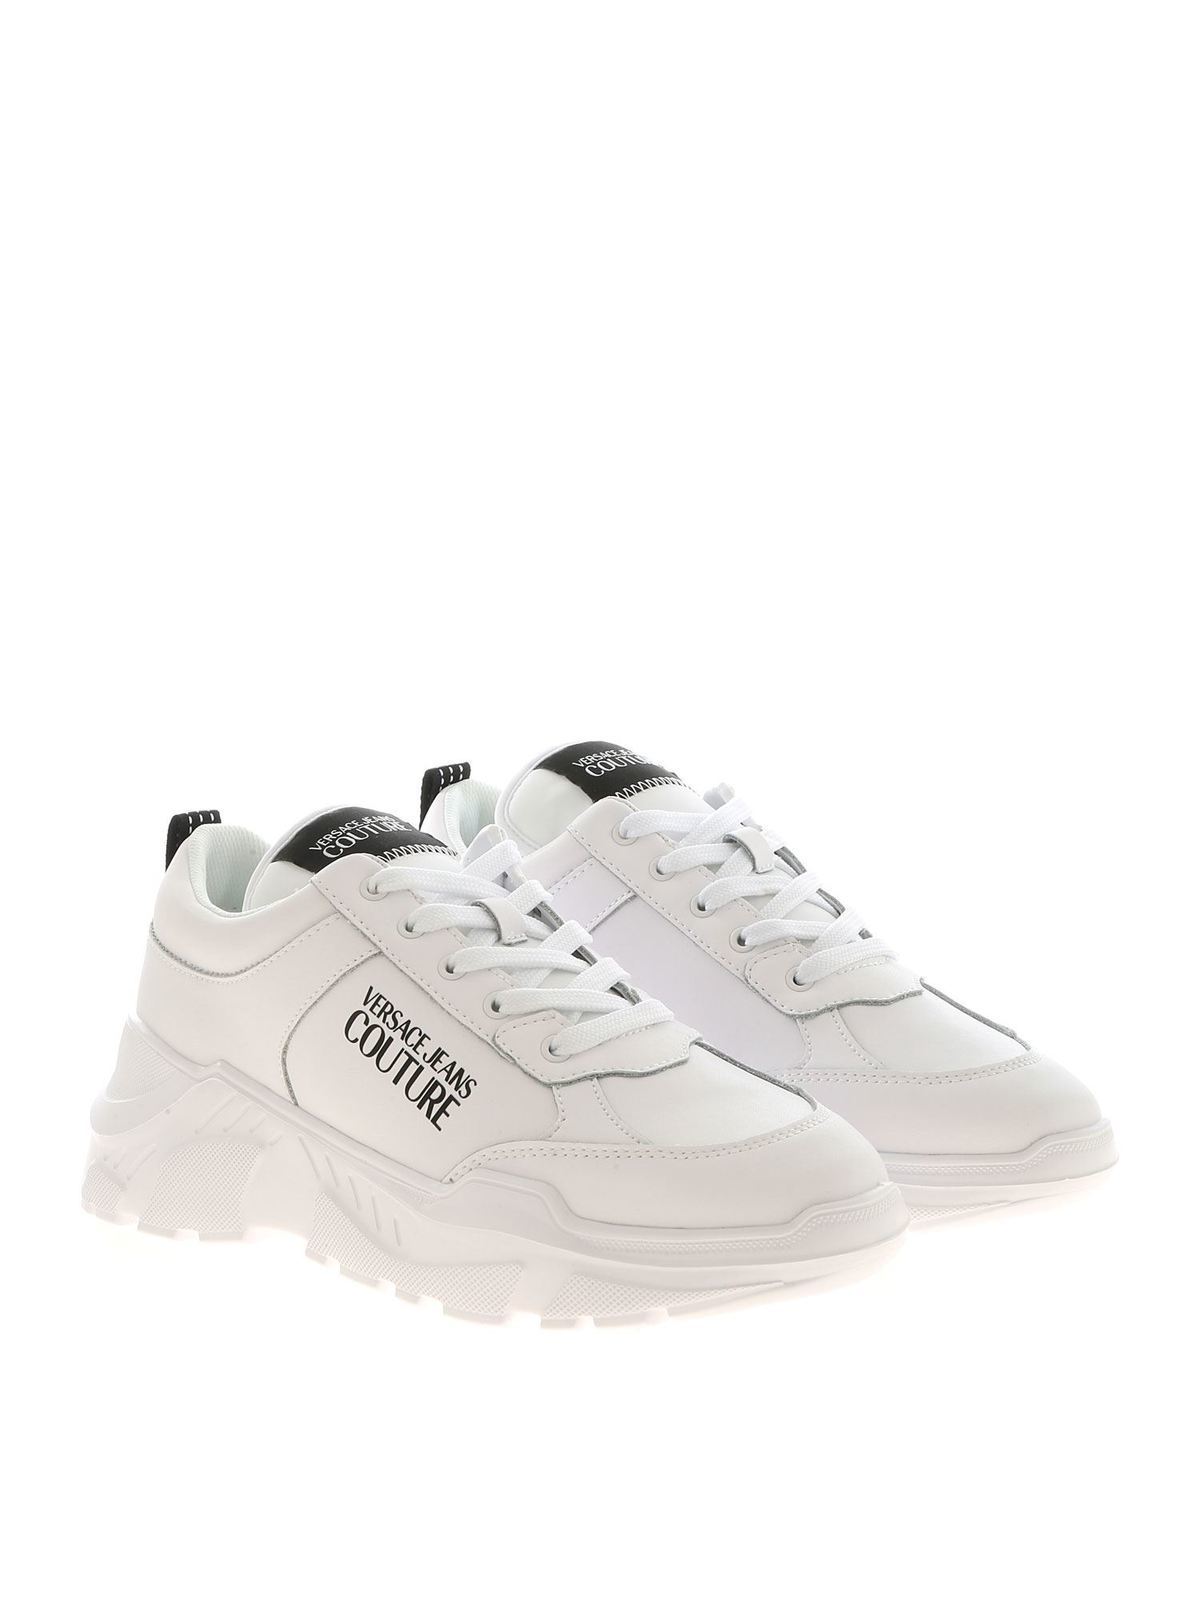 versace jeans white trainers